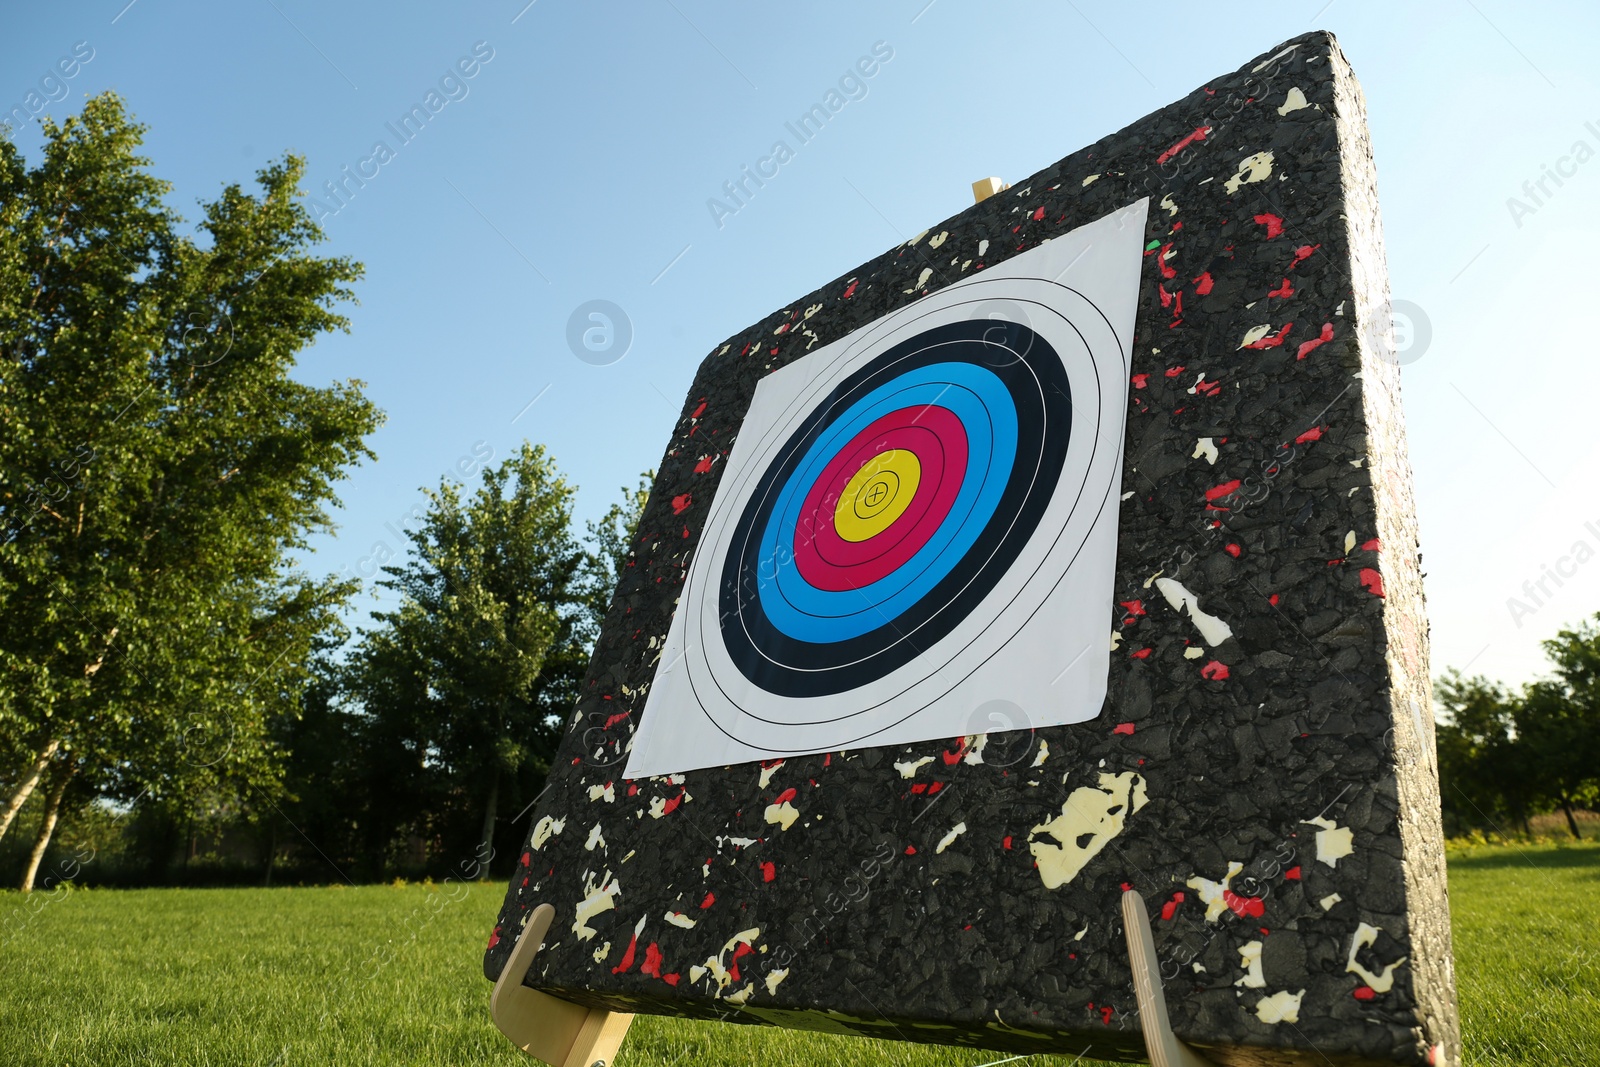 Photo of Tripod with archery target on green grass in park